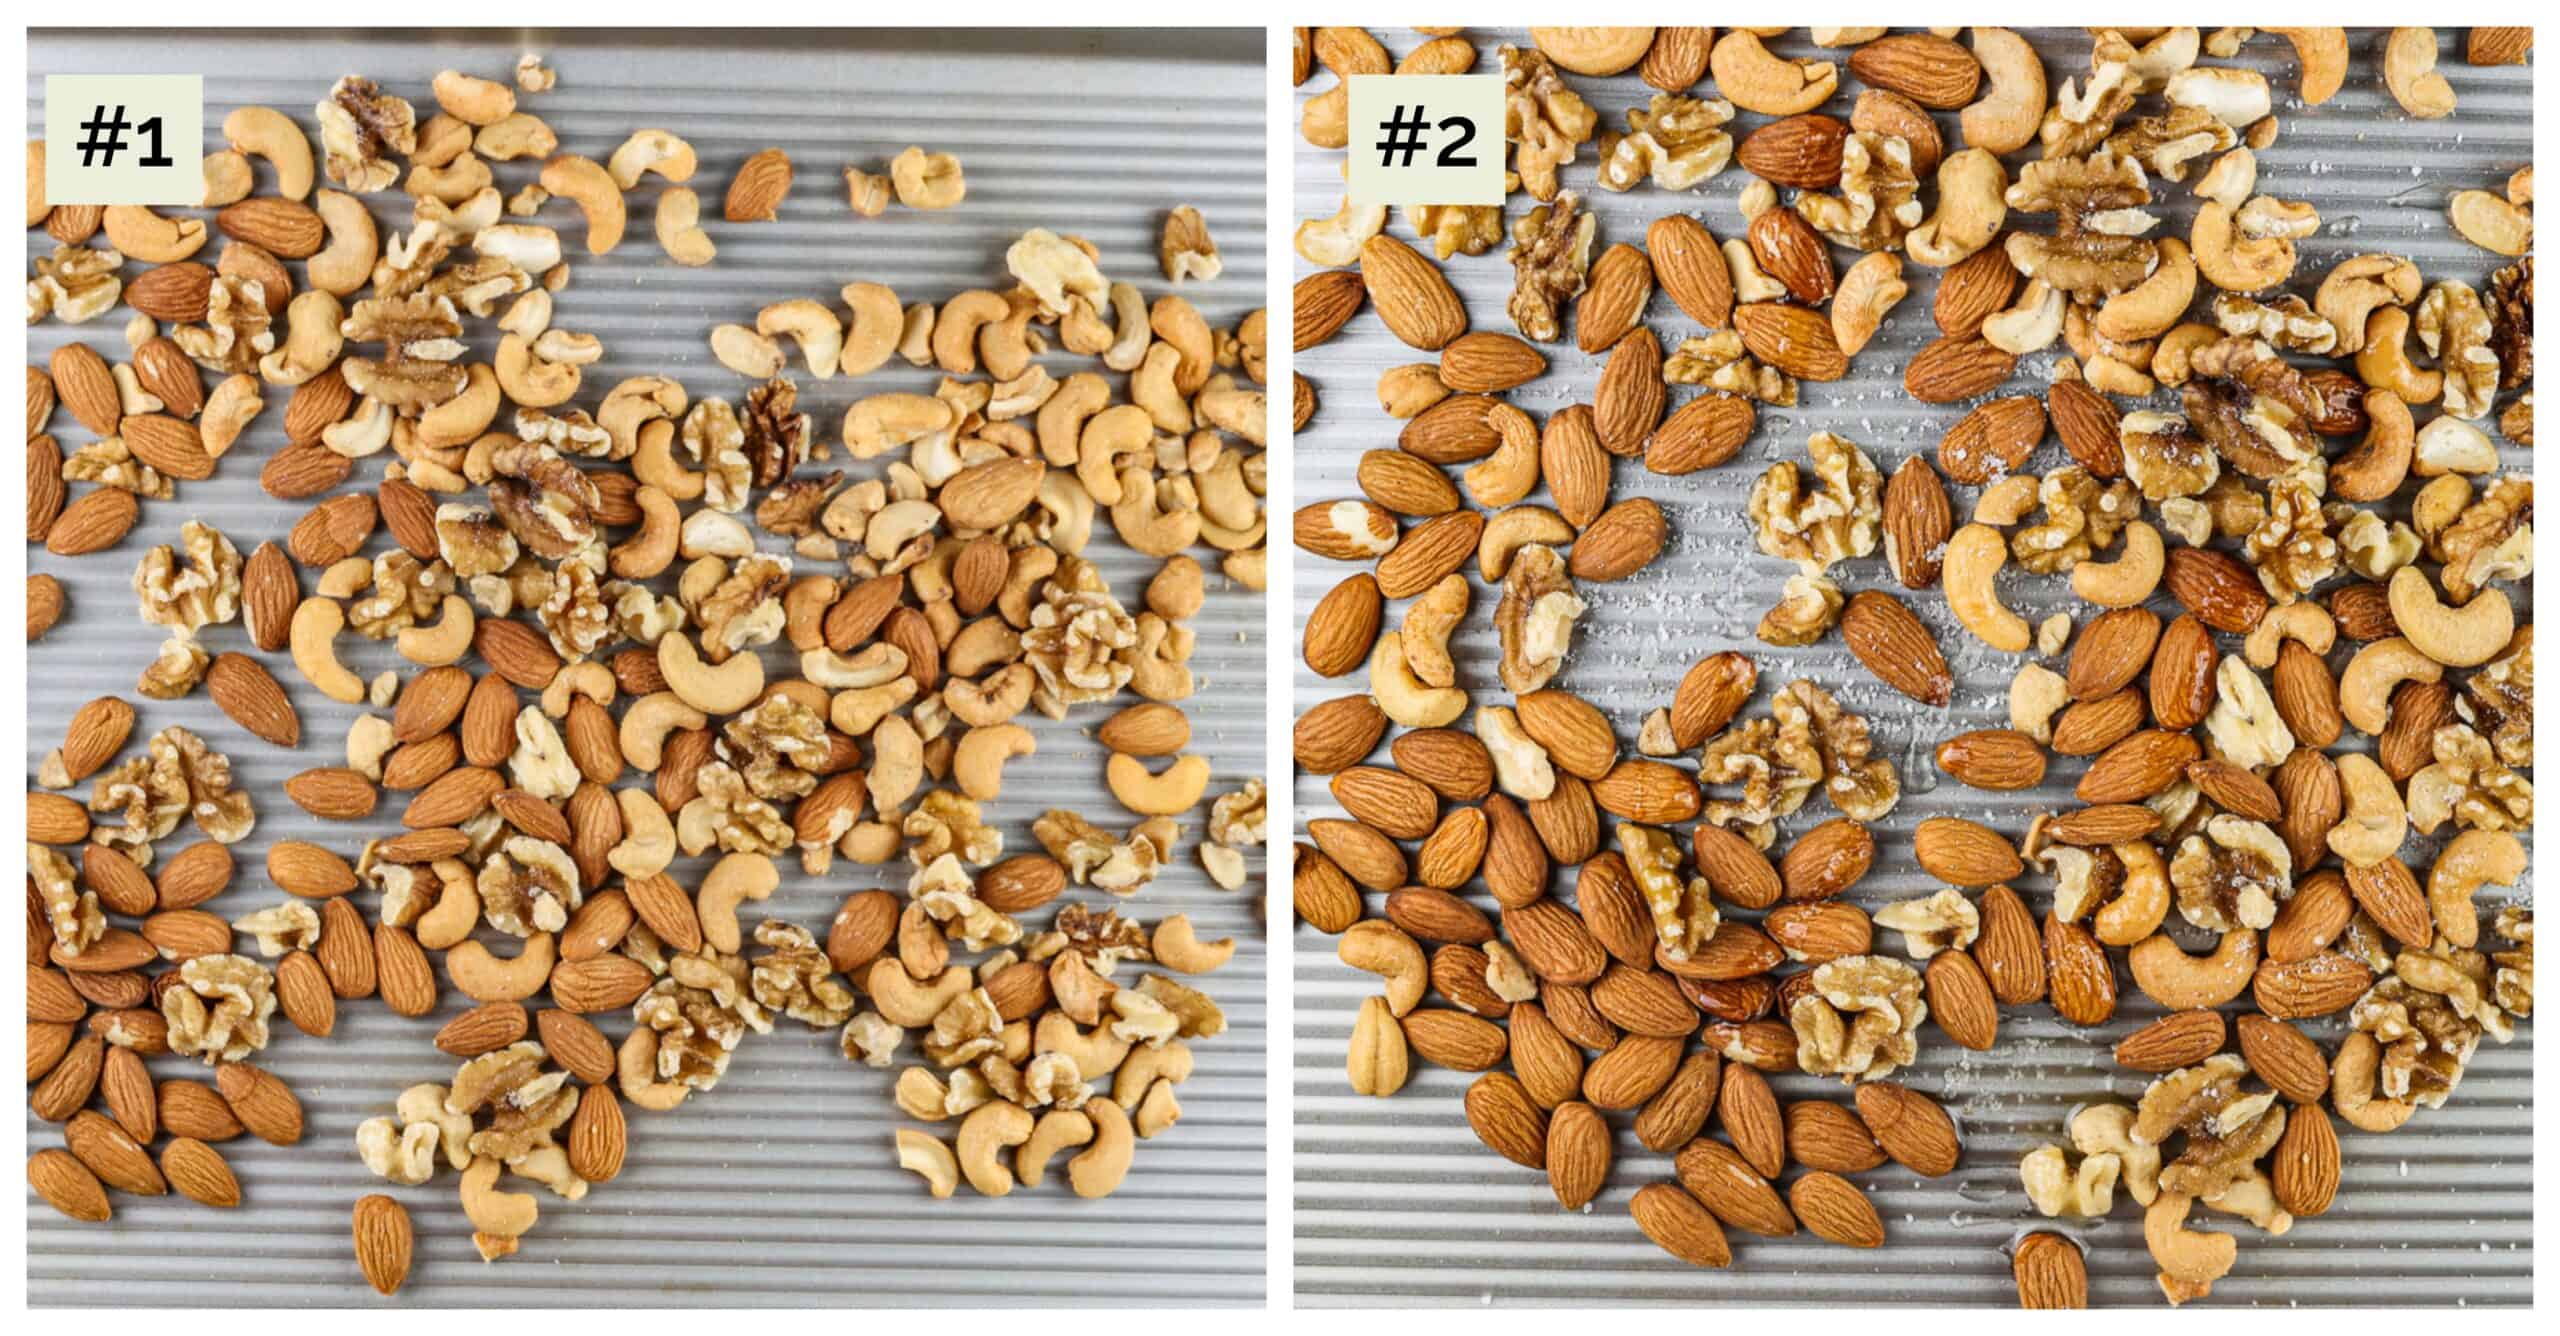 Two side by side images of nuts on baking sheets.